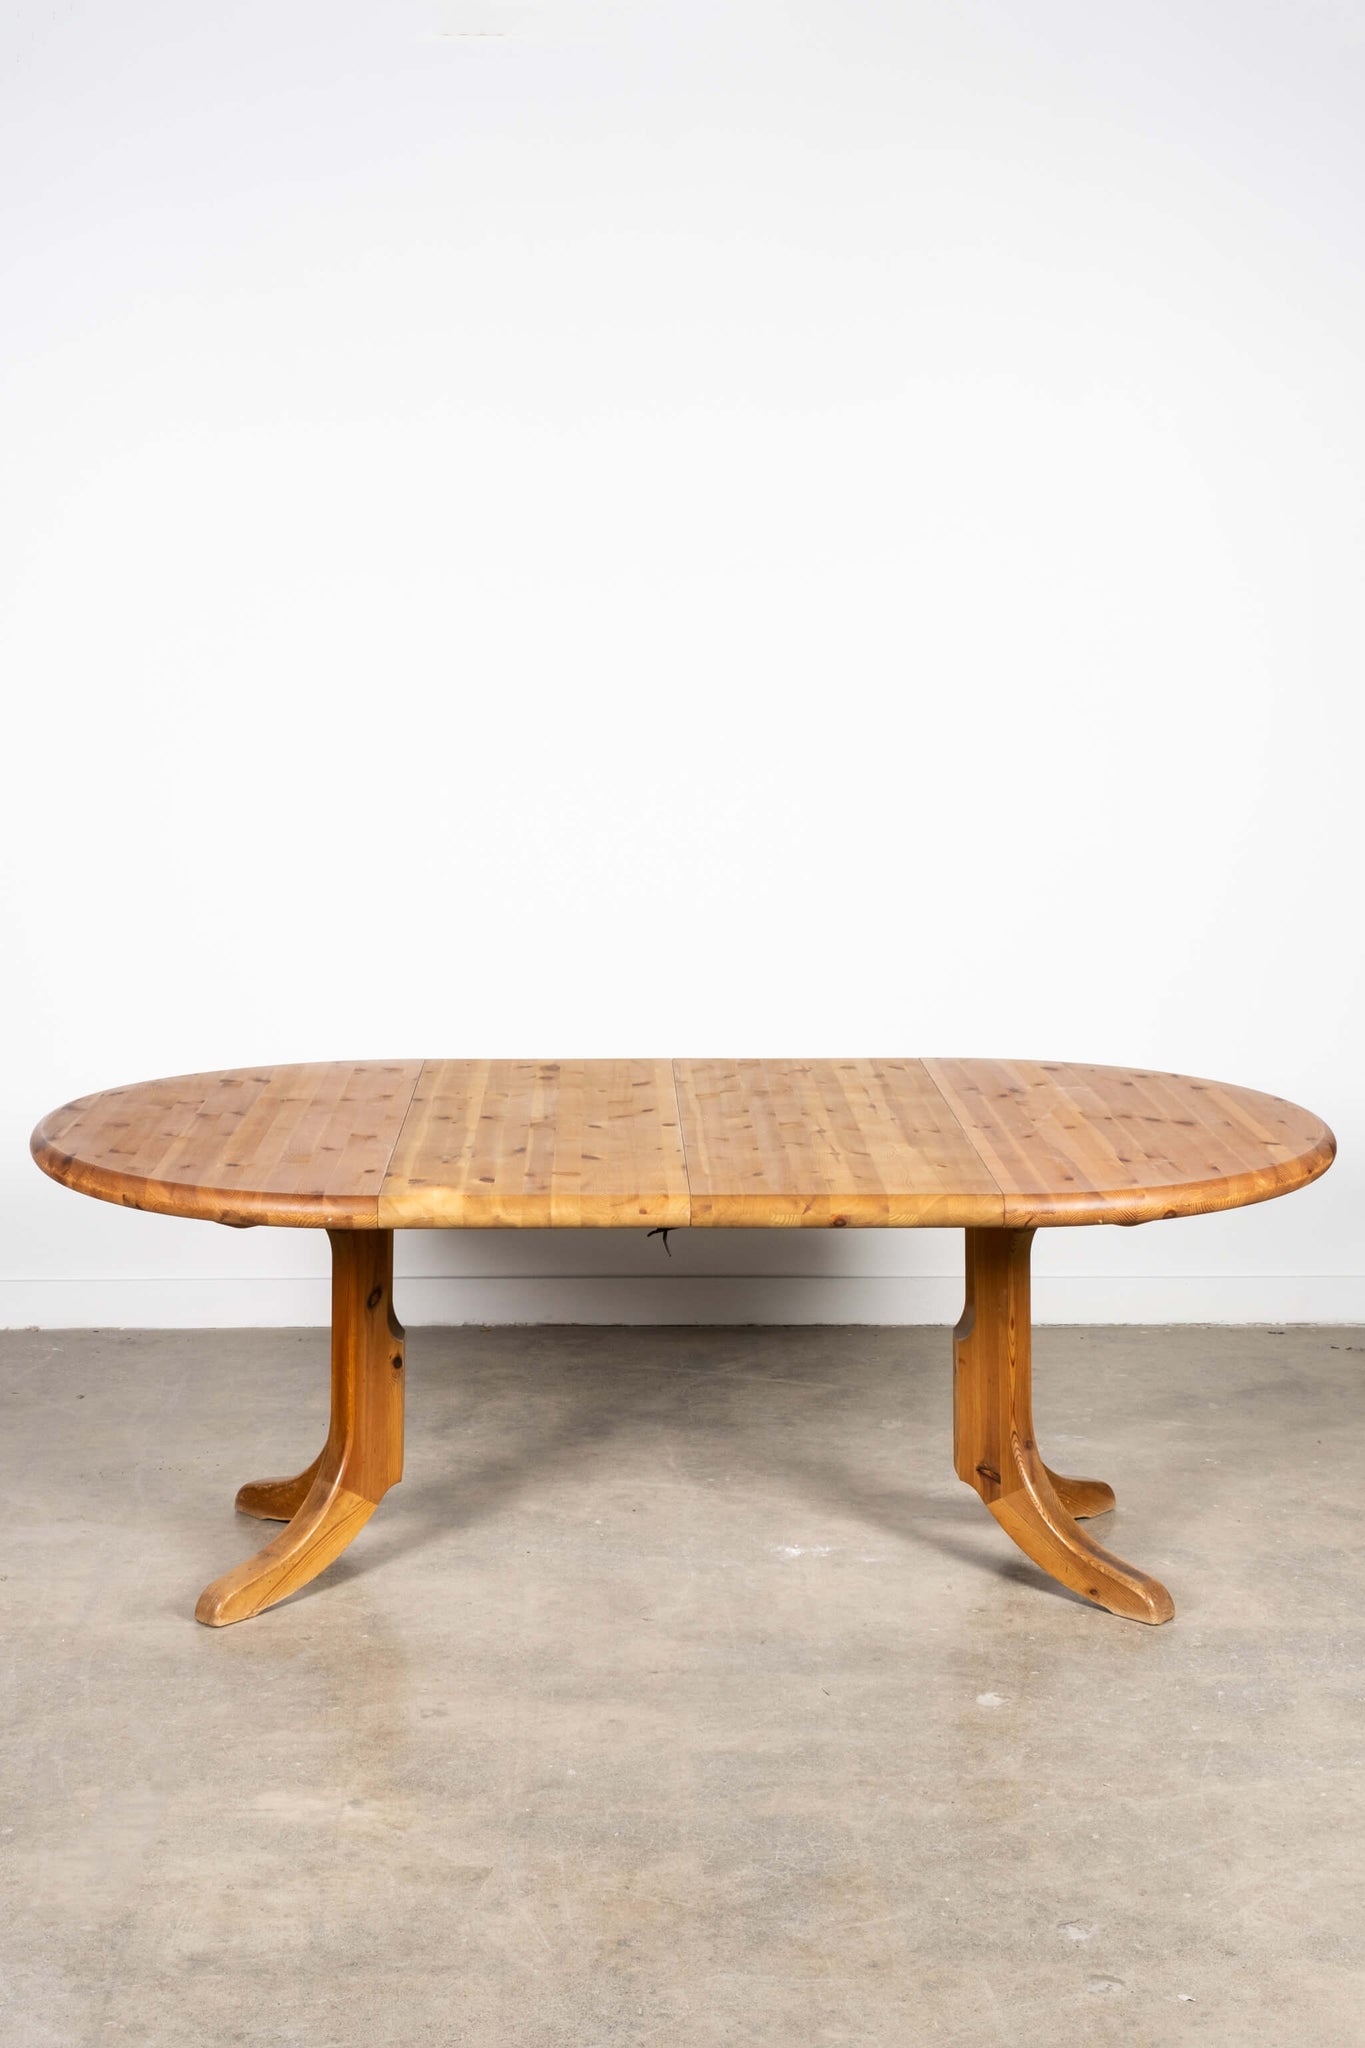 Vintage 1970s Solid Pine Extendable Dining Table, shown with 2 leaves